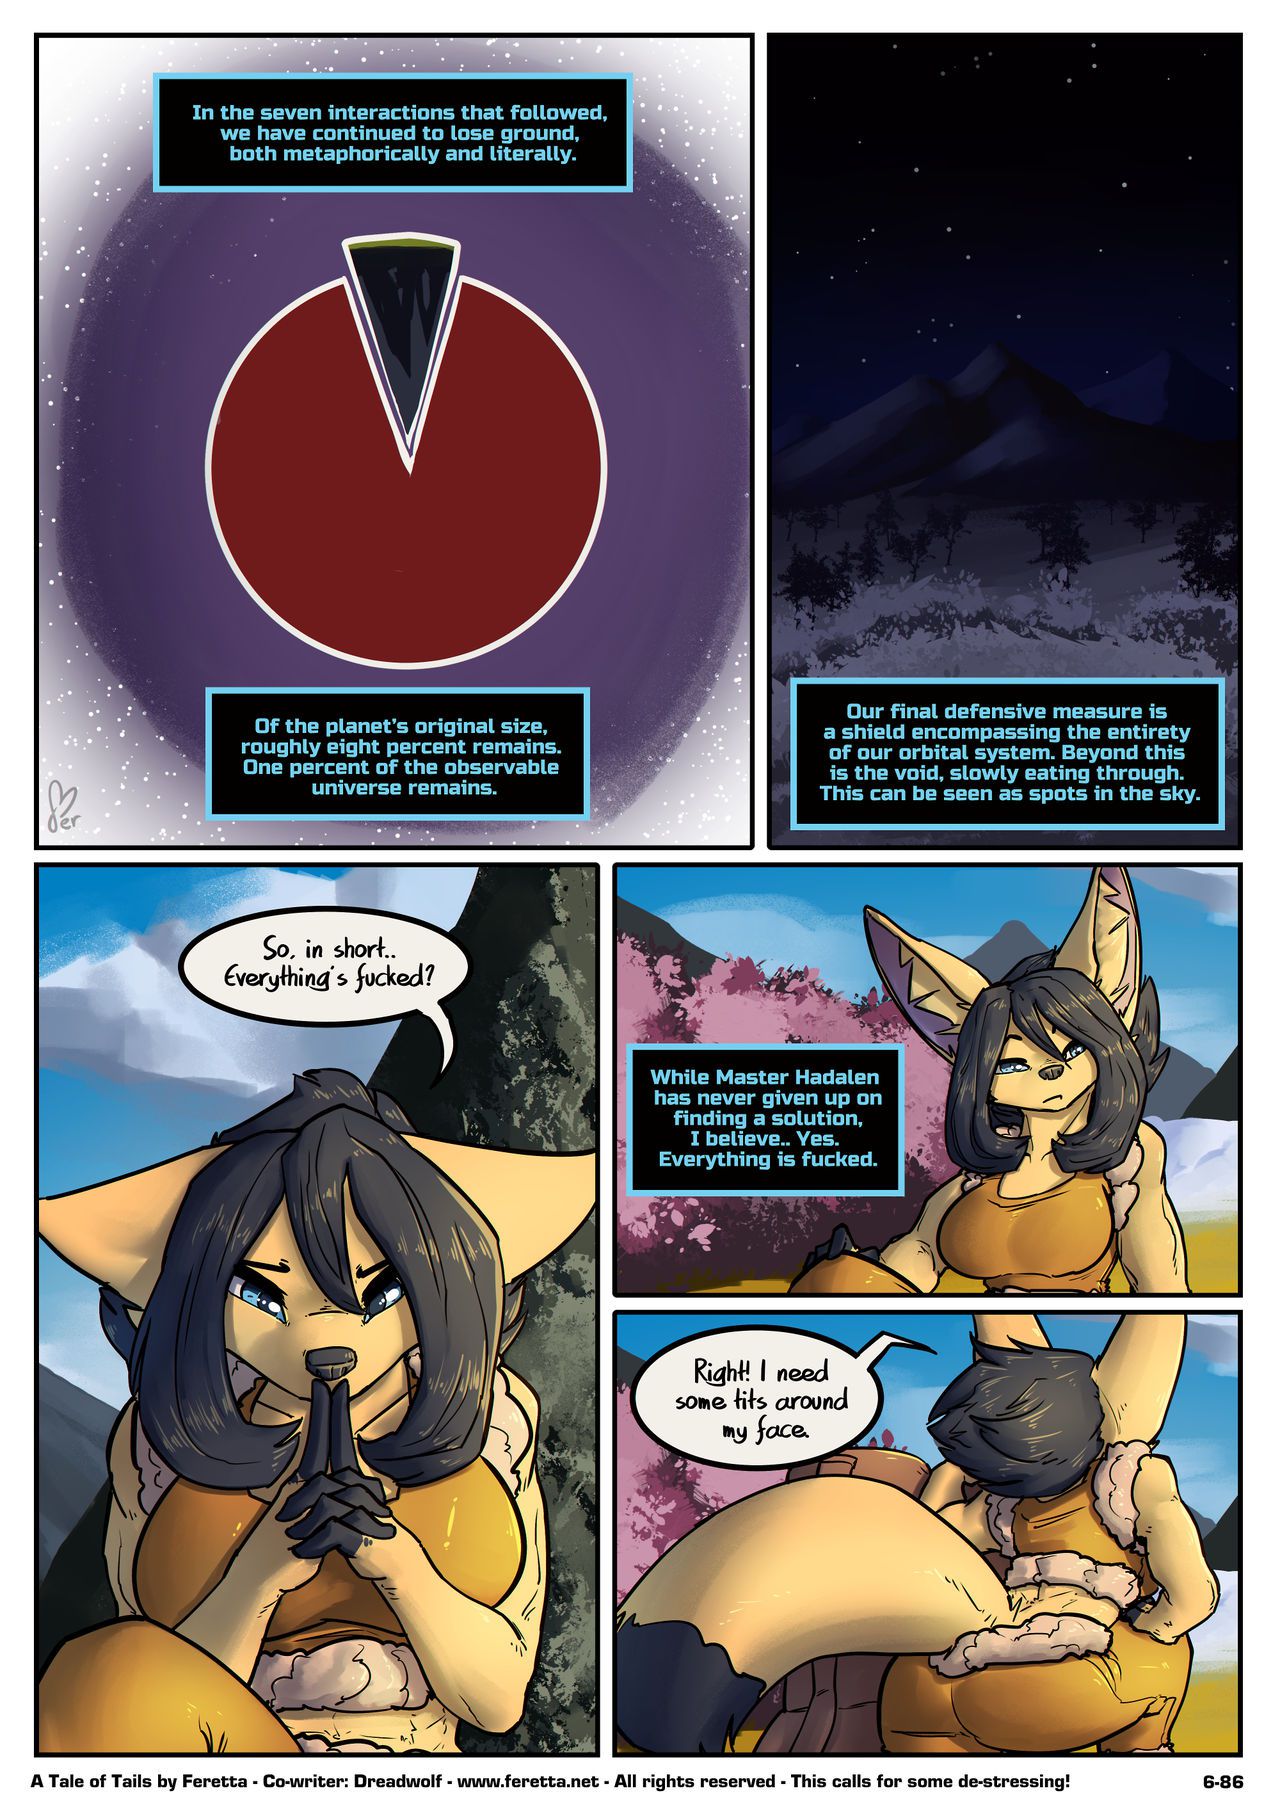 [Feretta] Farellian Legends: A Tale of Tails (w/Extras) [Ongoing] 381